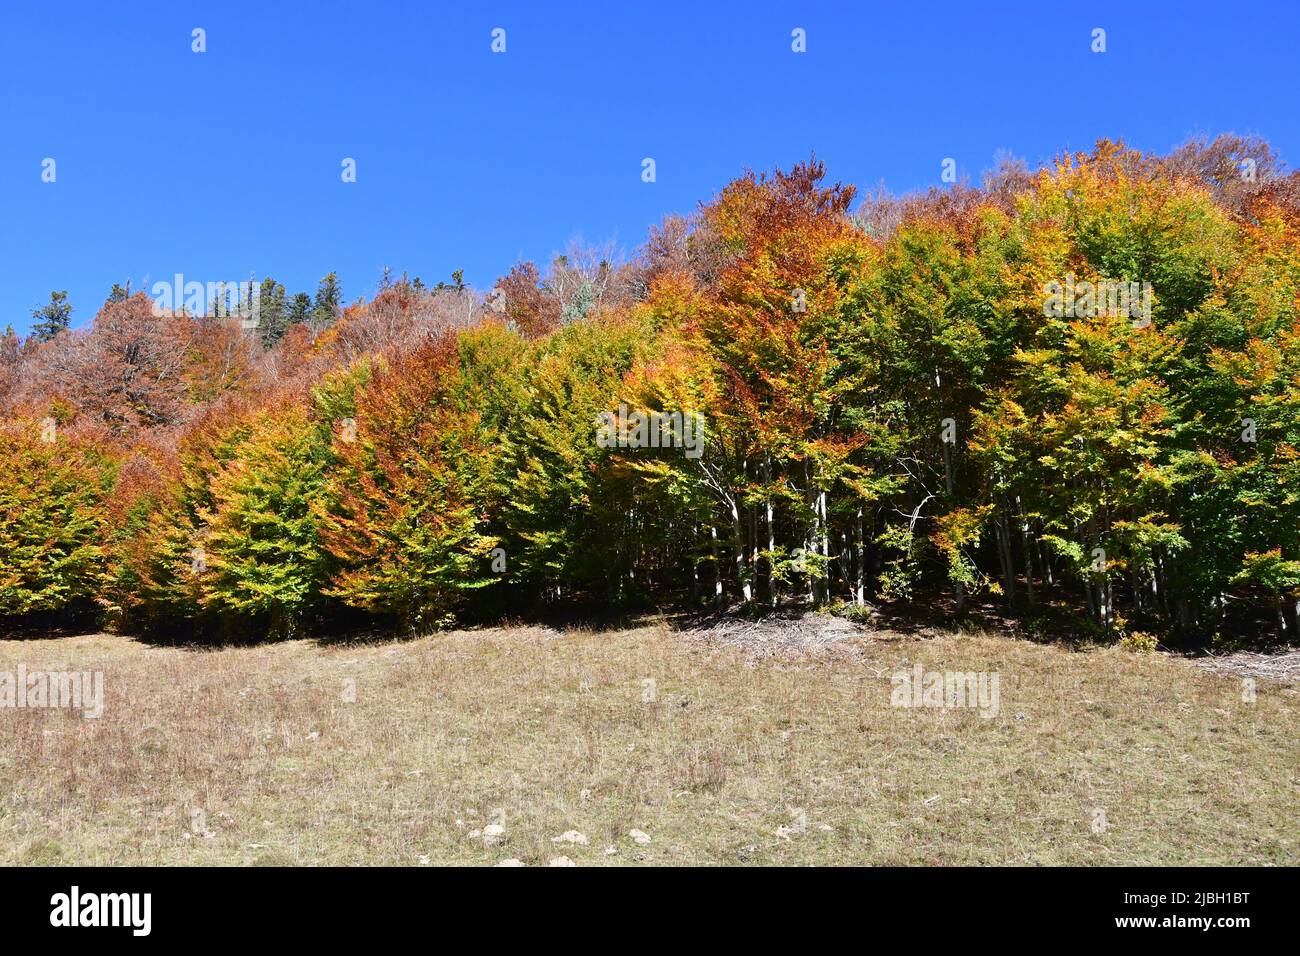 Gamueta forest in the Spain's Pyrenees Stock Photo